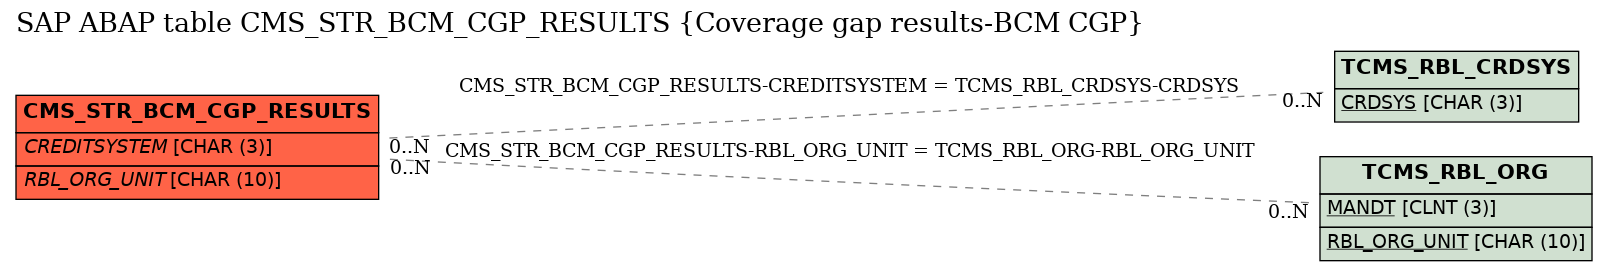 E-R Diagram for table CMS_STR_BCM_CGP_RESULTS (Coverage gap results-BCM CGP)